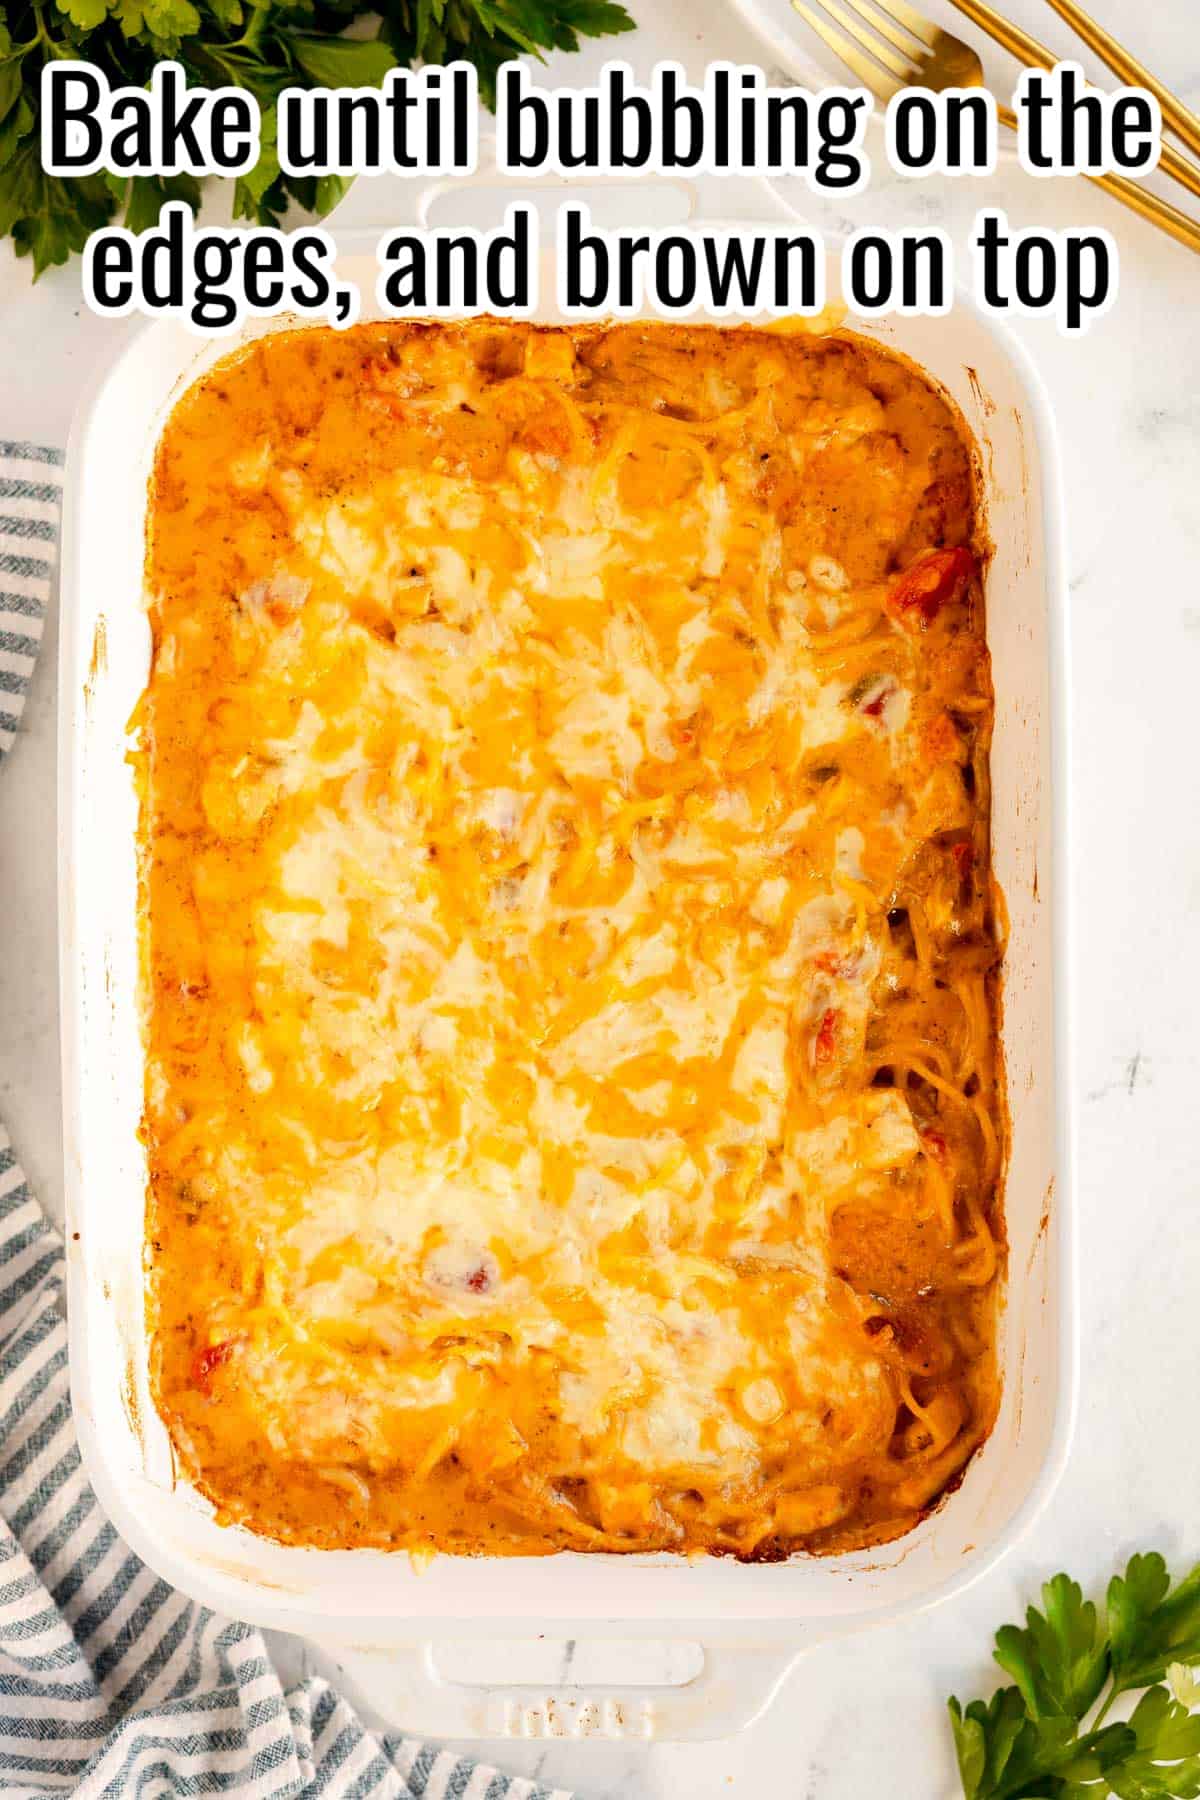 A creamy chicken casserole dish with the words bake until bubbling on the edges, and brown on top.